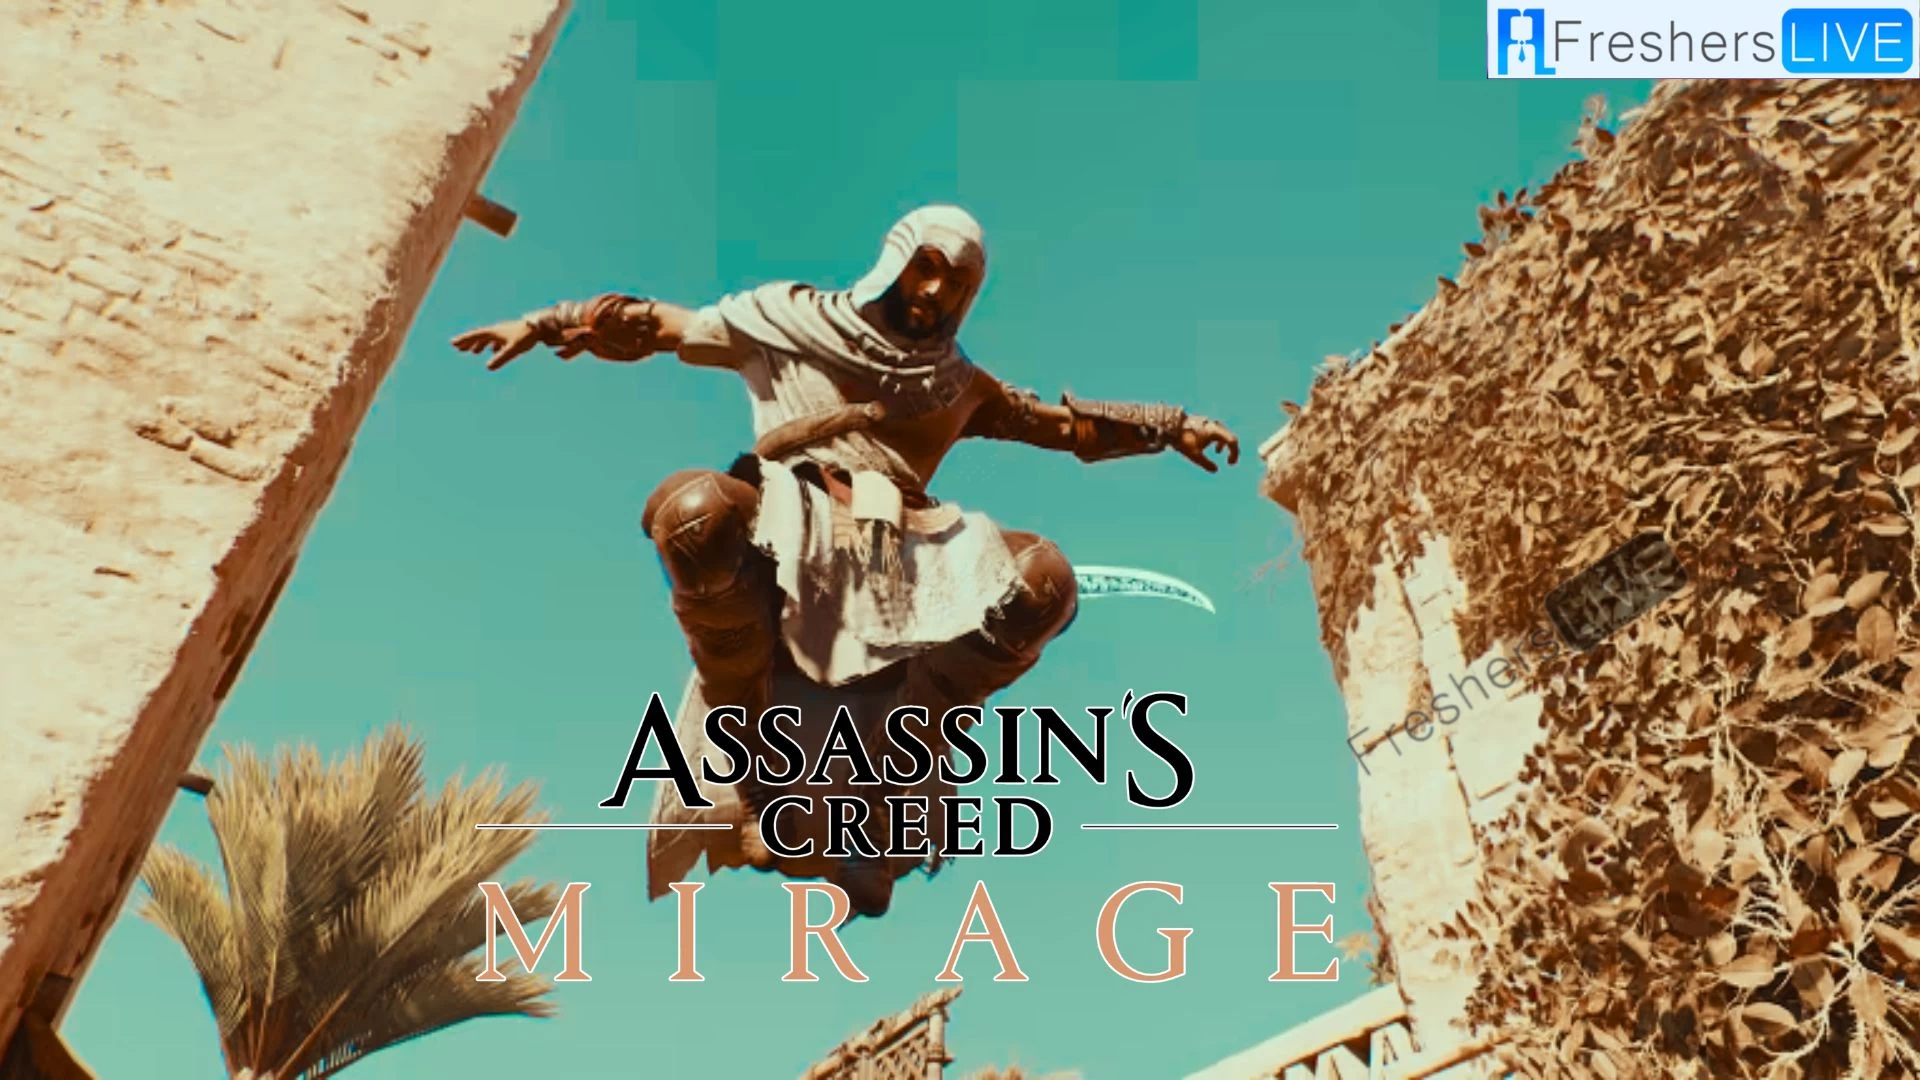 Assassin's Creed Mirage Best Weapons: How to Get Them?